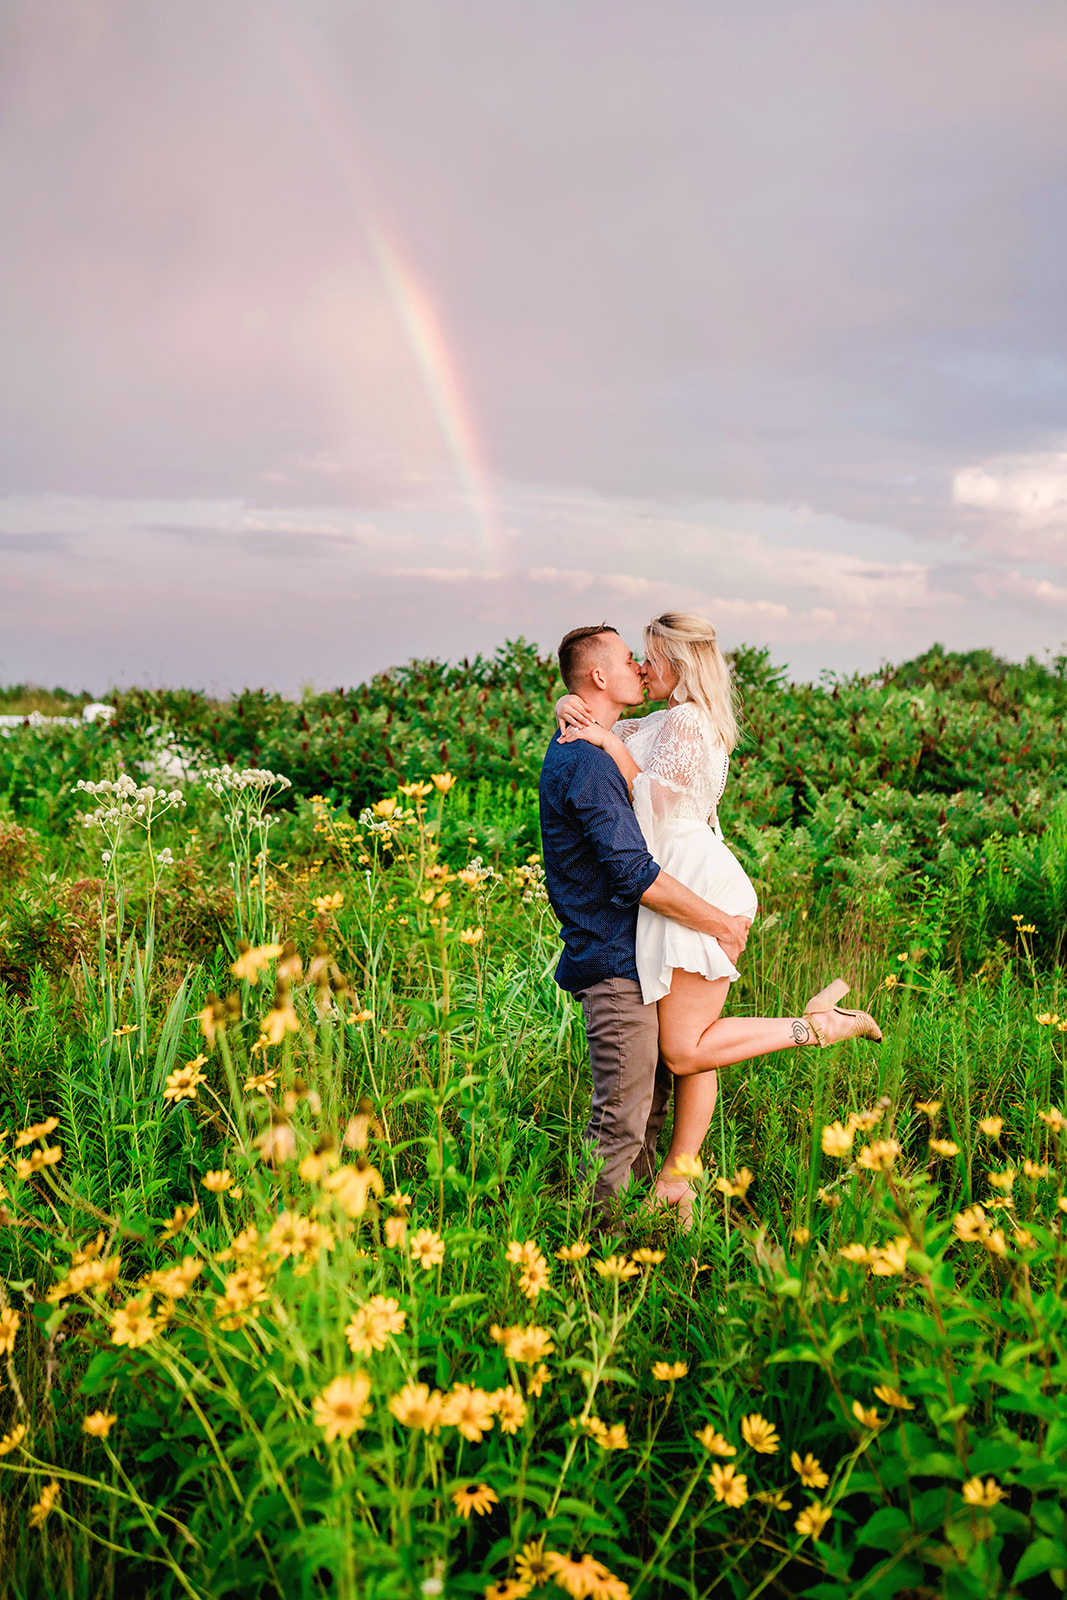 n a field of vibrant yellow flowers under a radiant rainbow, a man lifts his partner tenderly, sharing a loving kiss, capturing a moment of pure joy and romance.